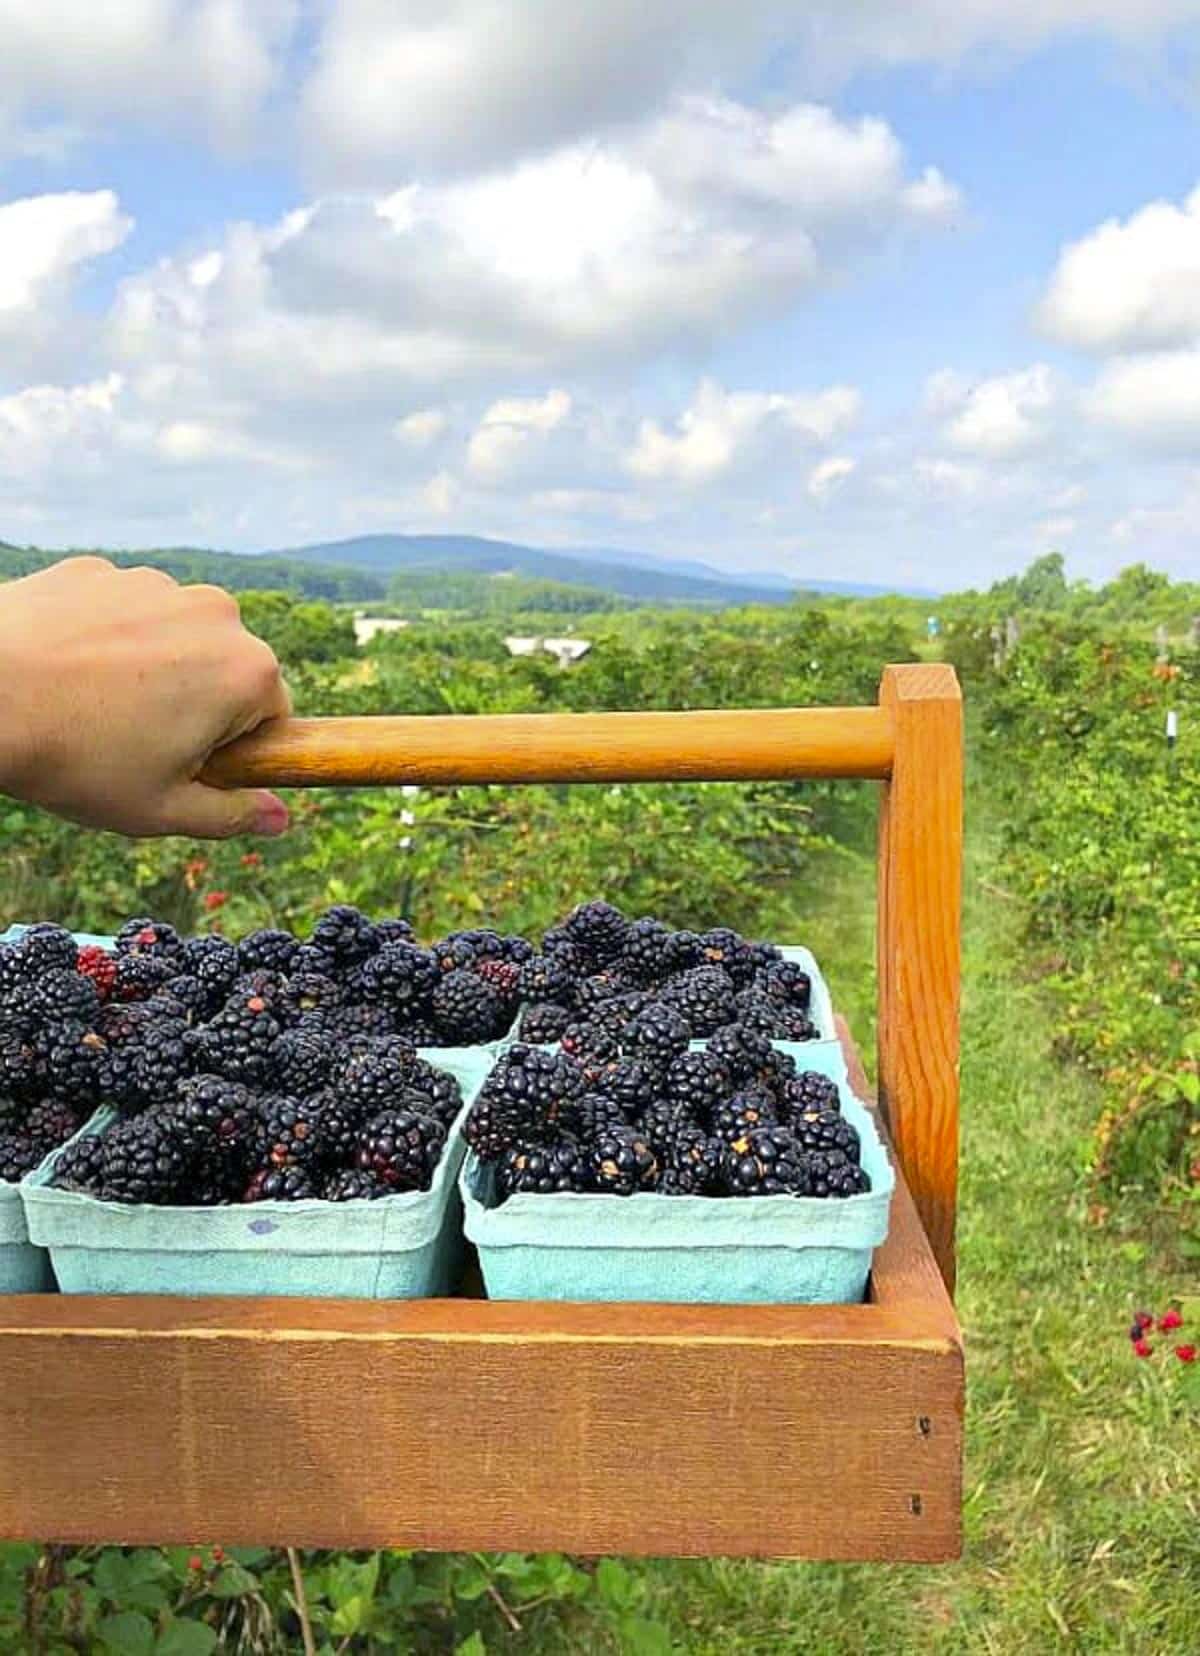 A basket of fresh blackberries with mountains in the background.